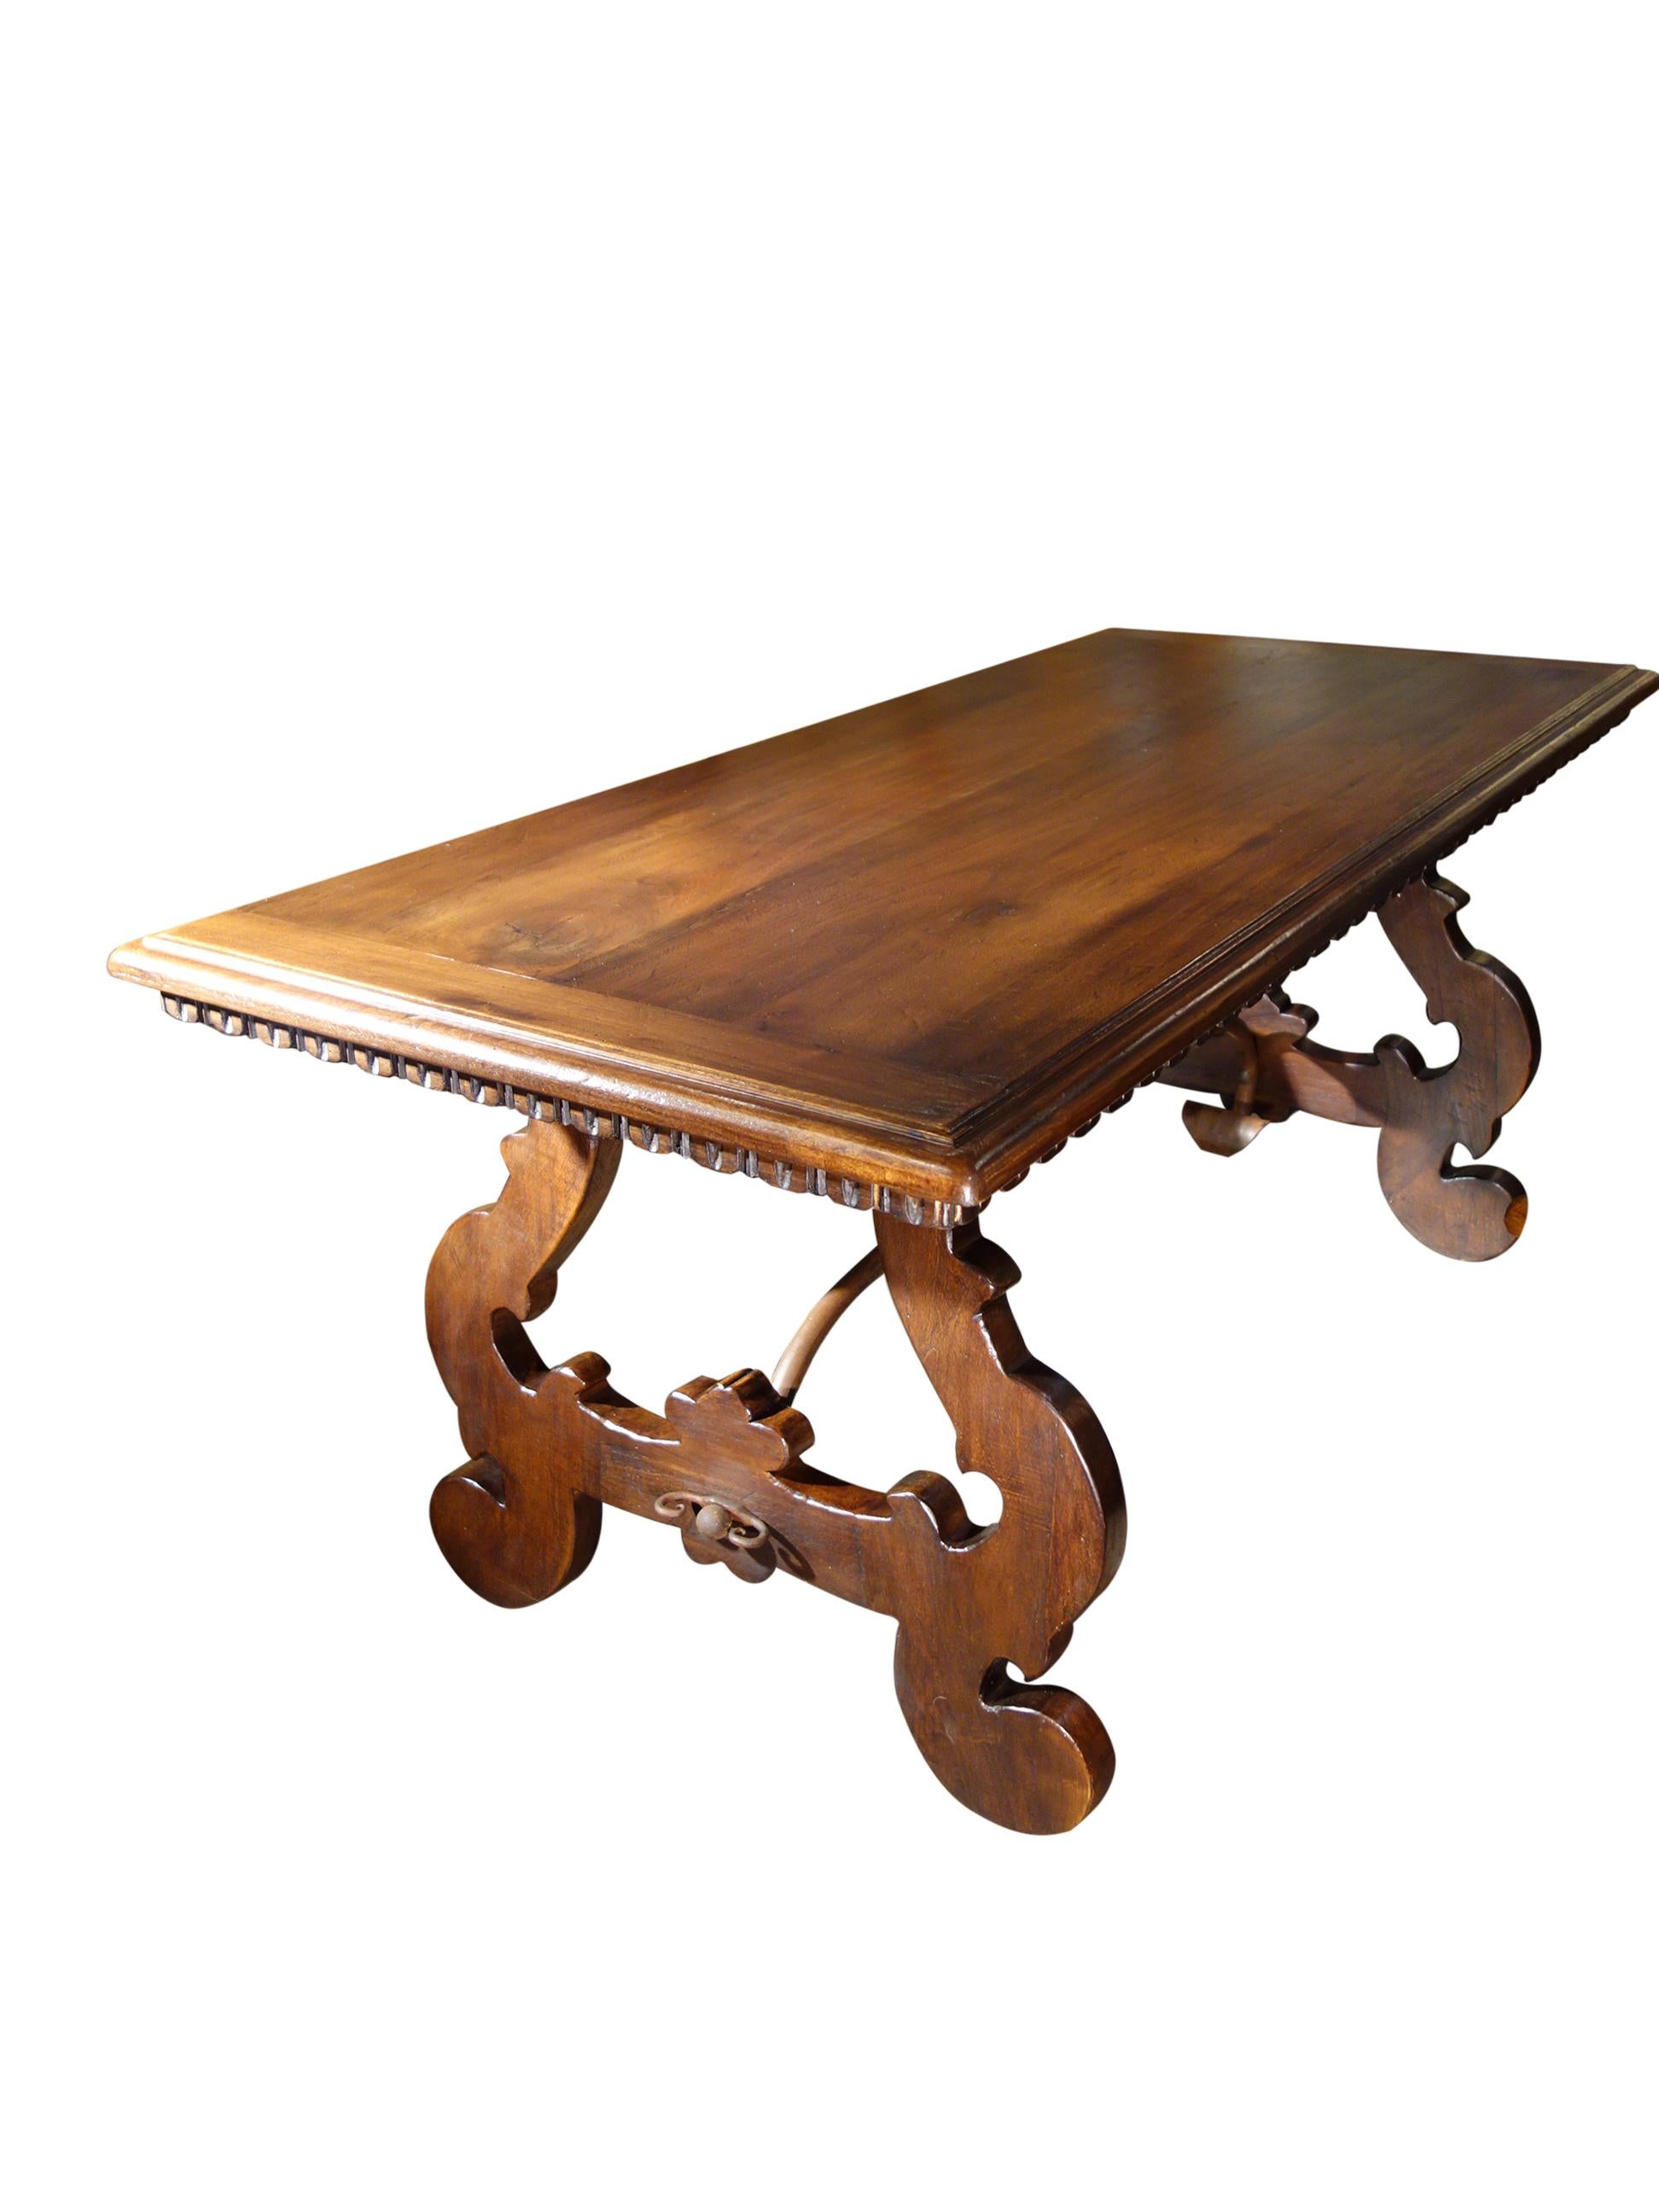 17th C Style Solid Italian Walnut Refectory Writing Dentil Edge Table options For Sale 7